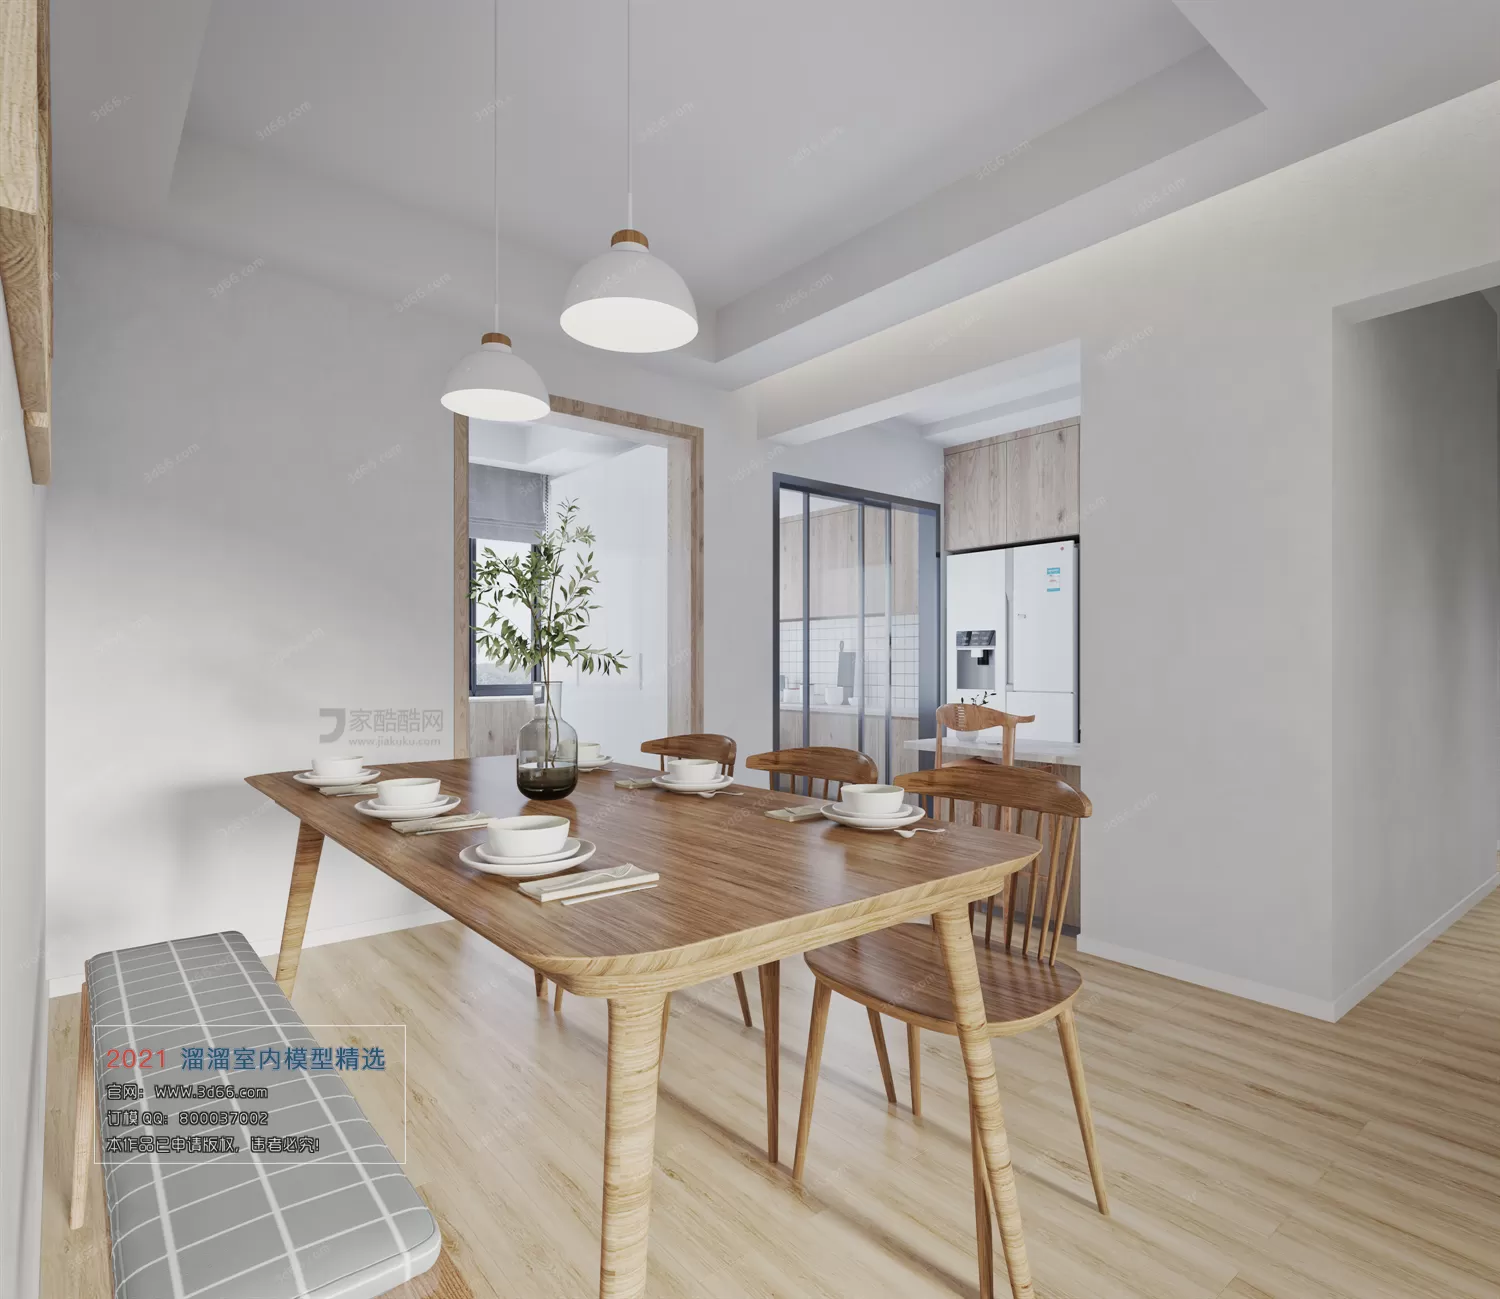 DINING, KITCHEN – M002-Nordic style-Vray model